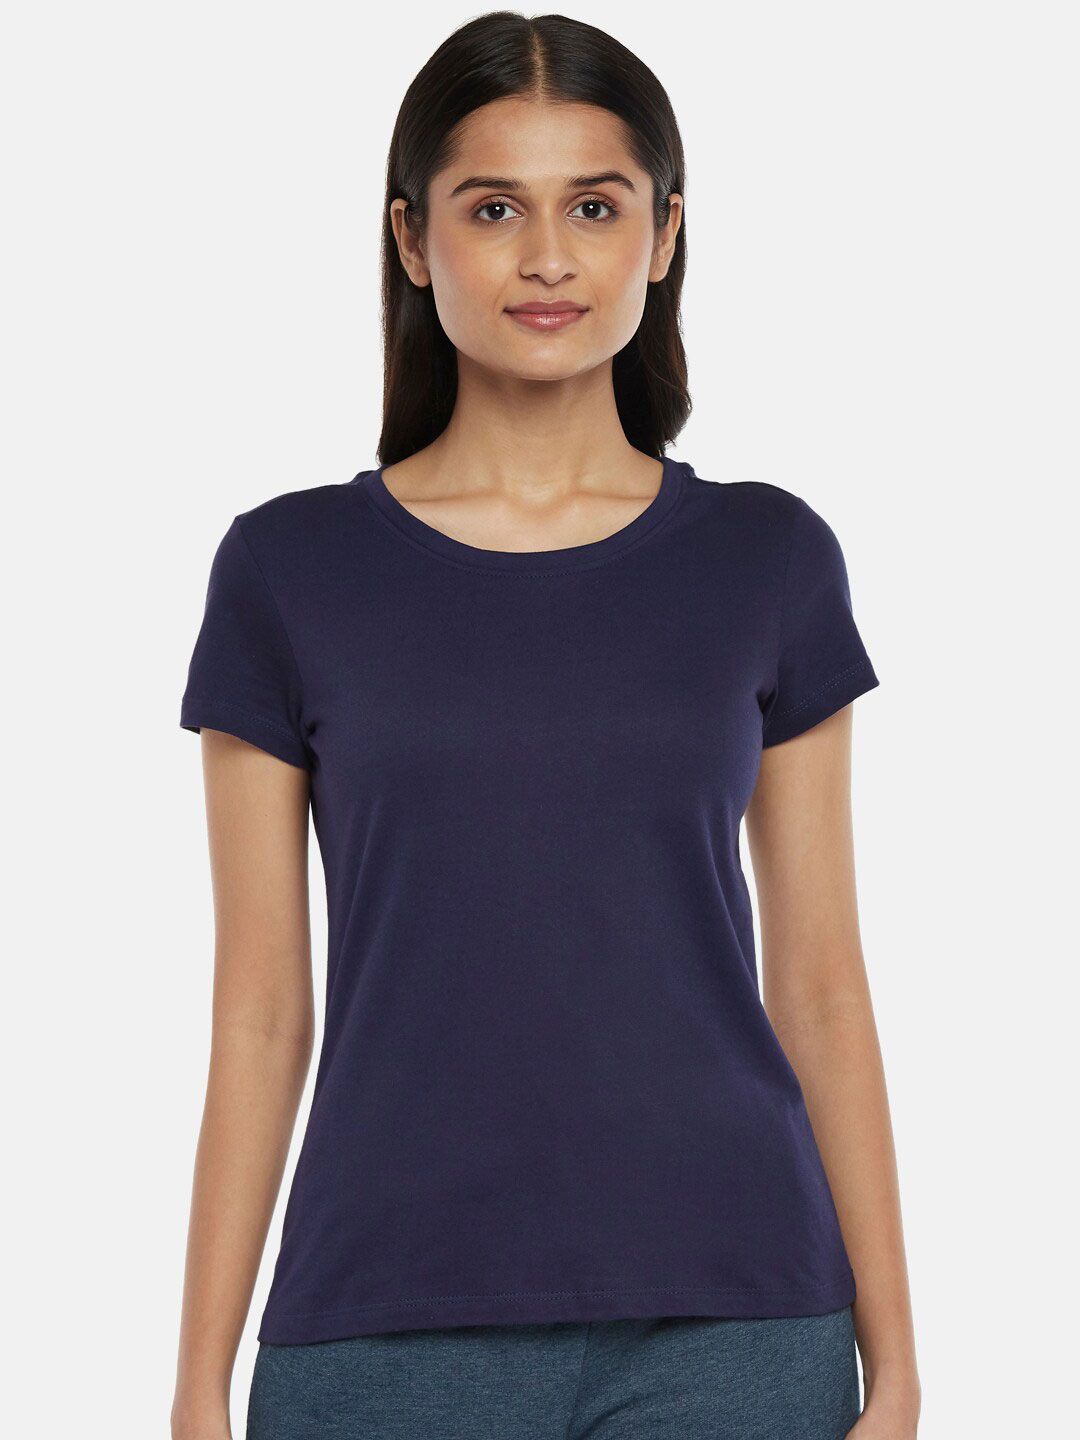 Dreamz by Pantaloons Women Navy Blue Solid Lounge tshirt Price in India